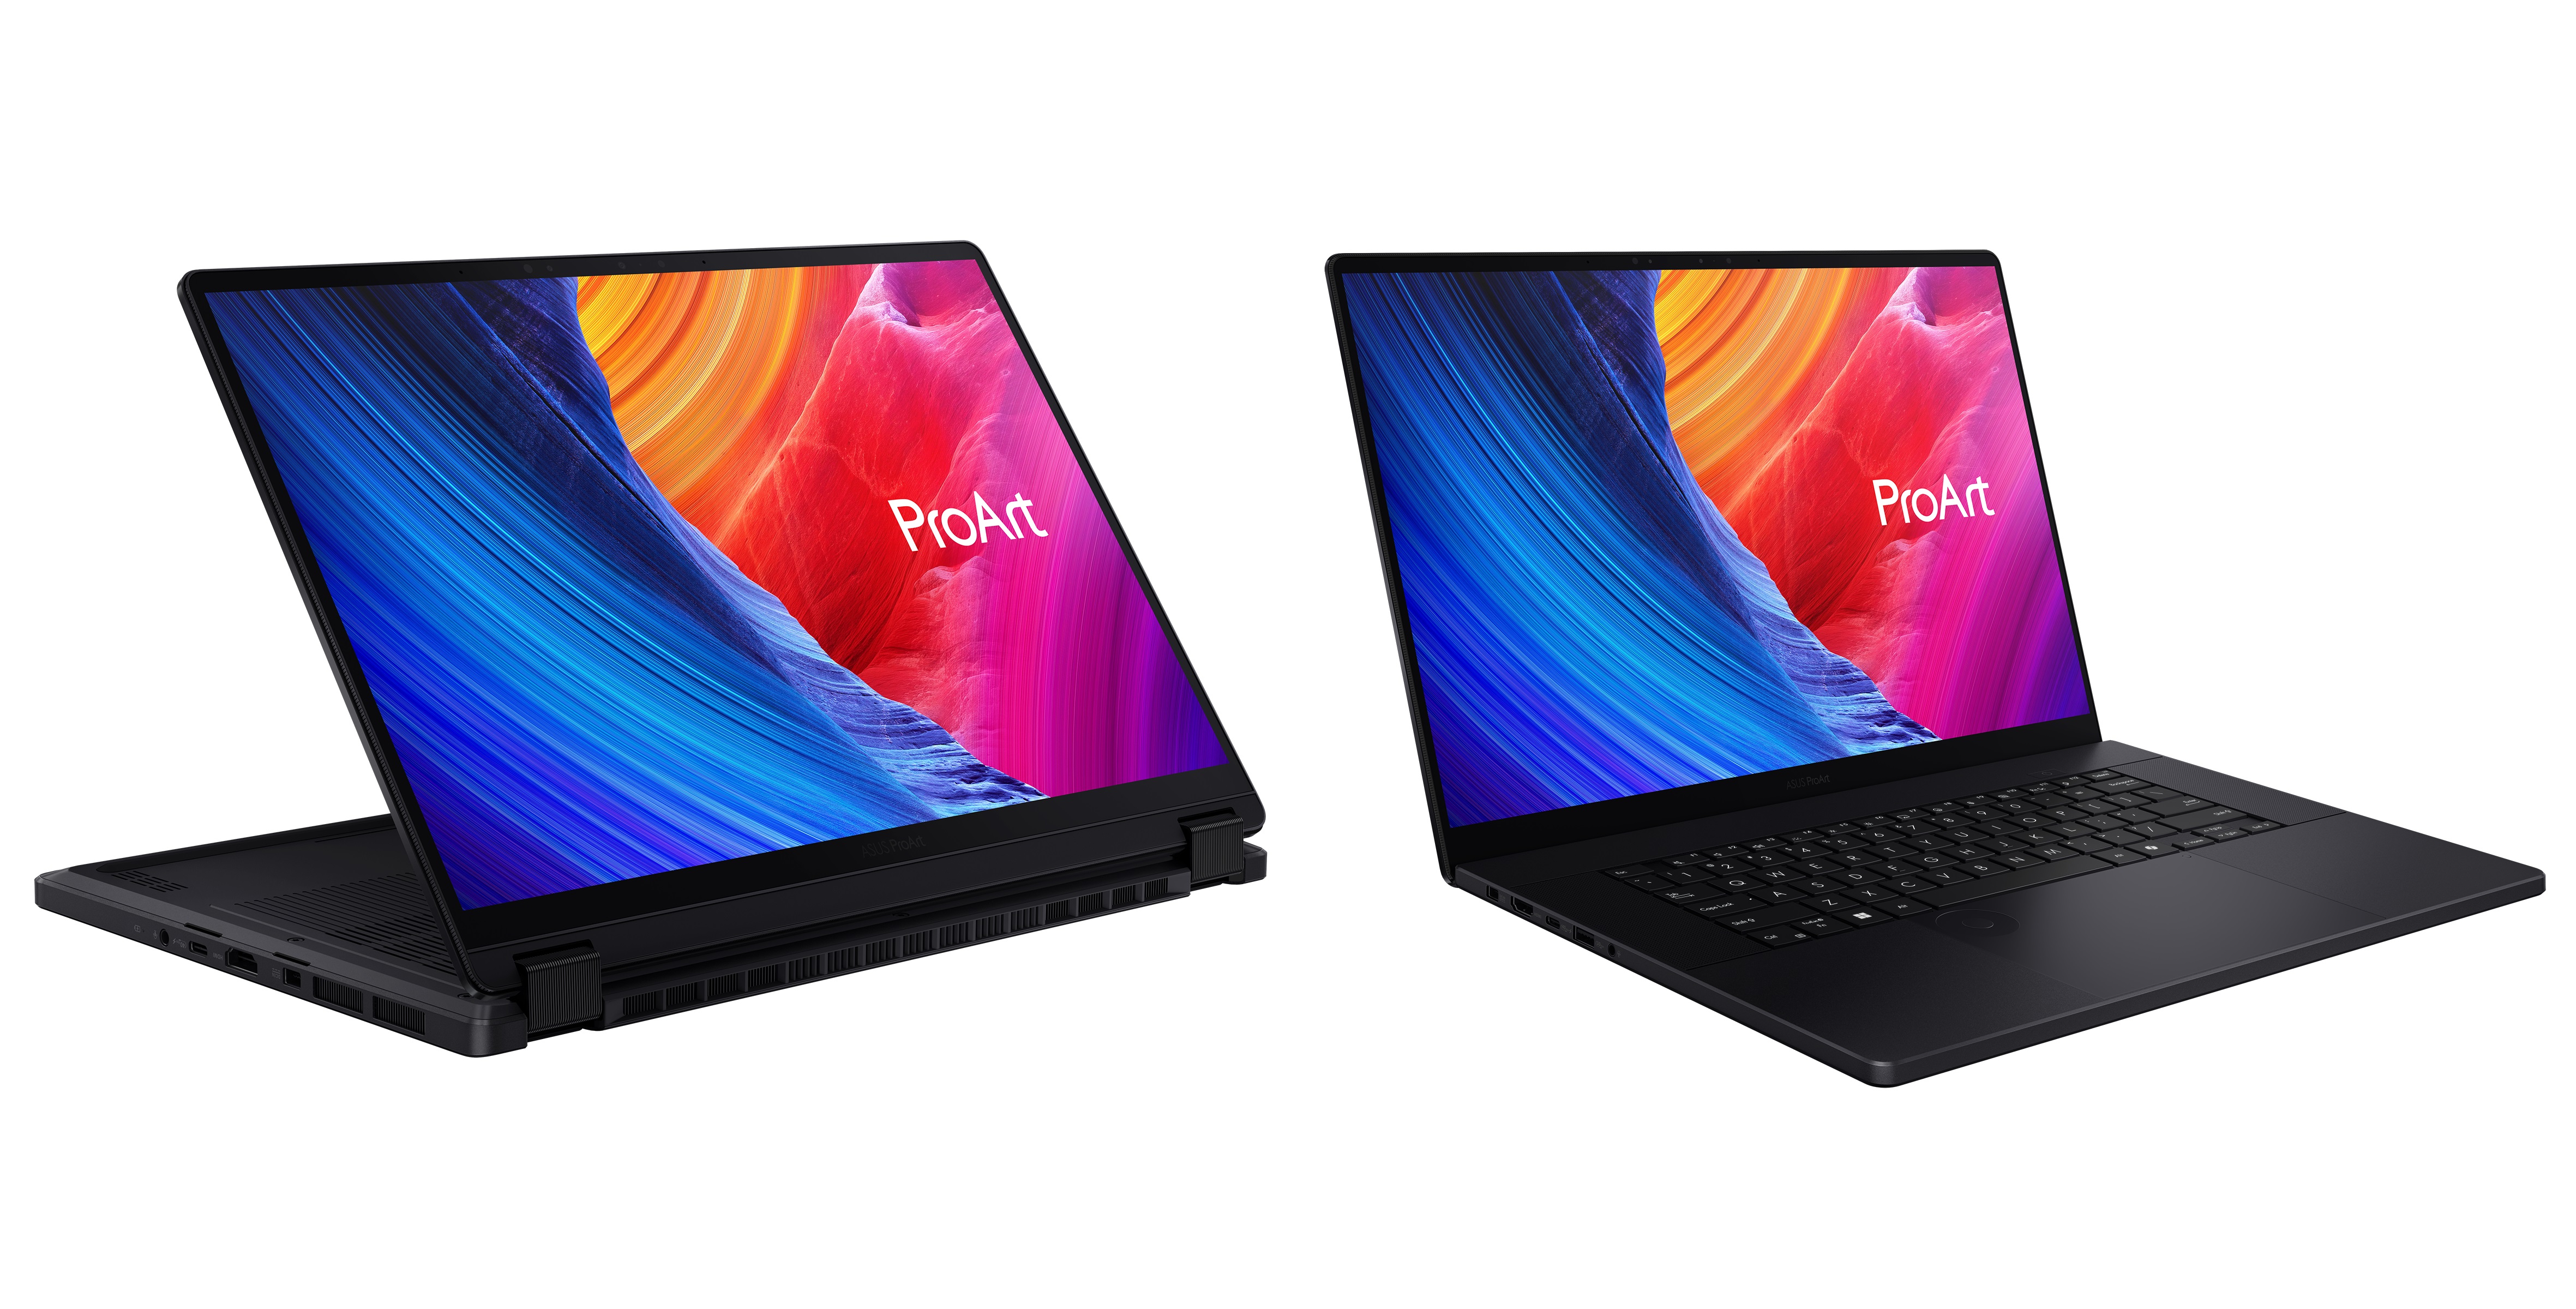 Asus ProArt PX13 and P16 notebooks